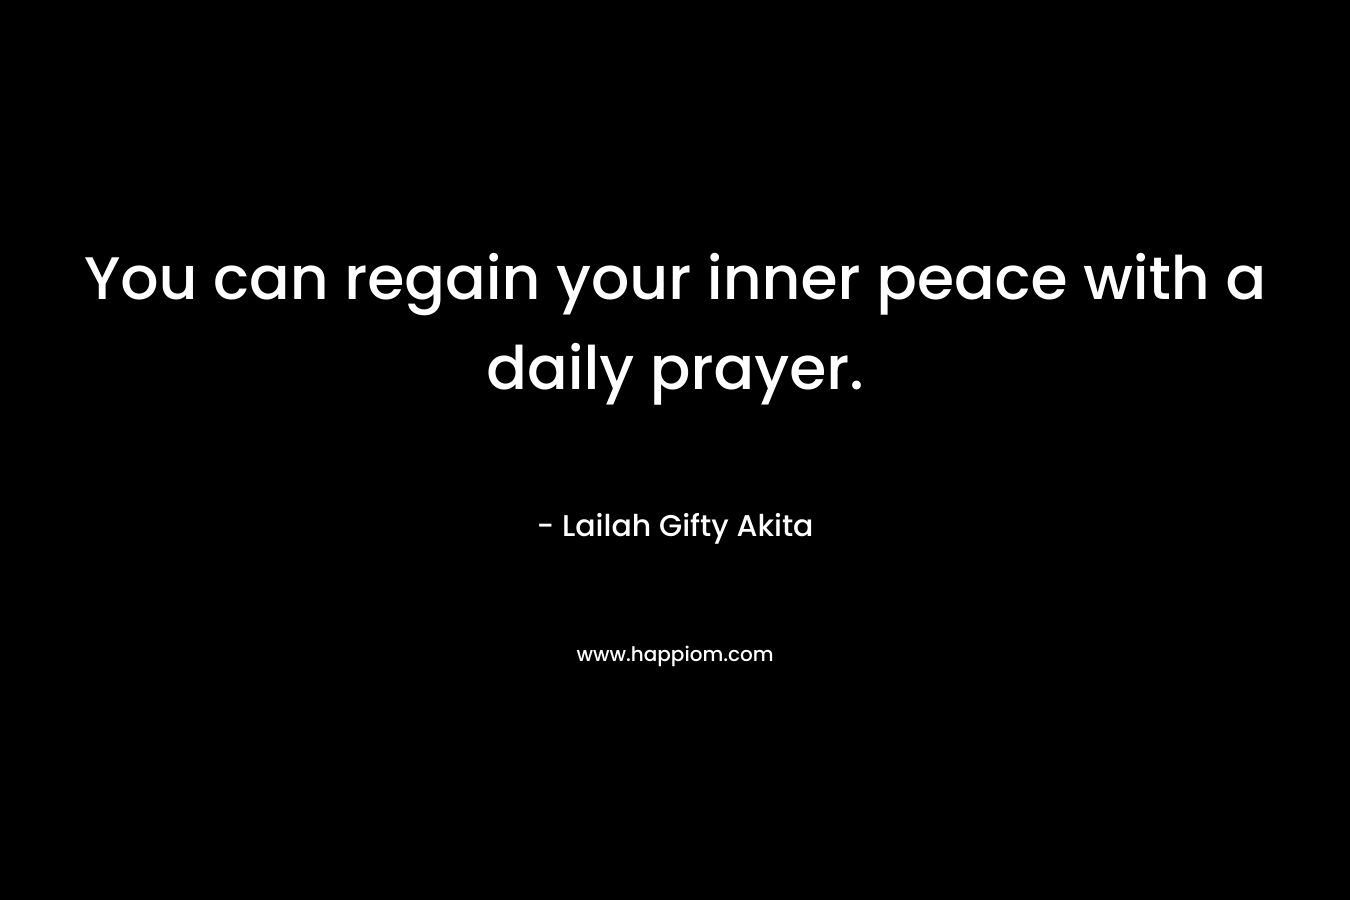 You can regain your inner peace with a daily prayer.